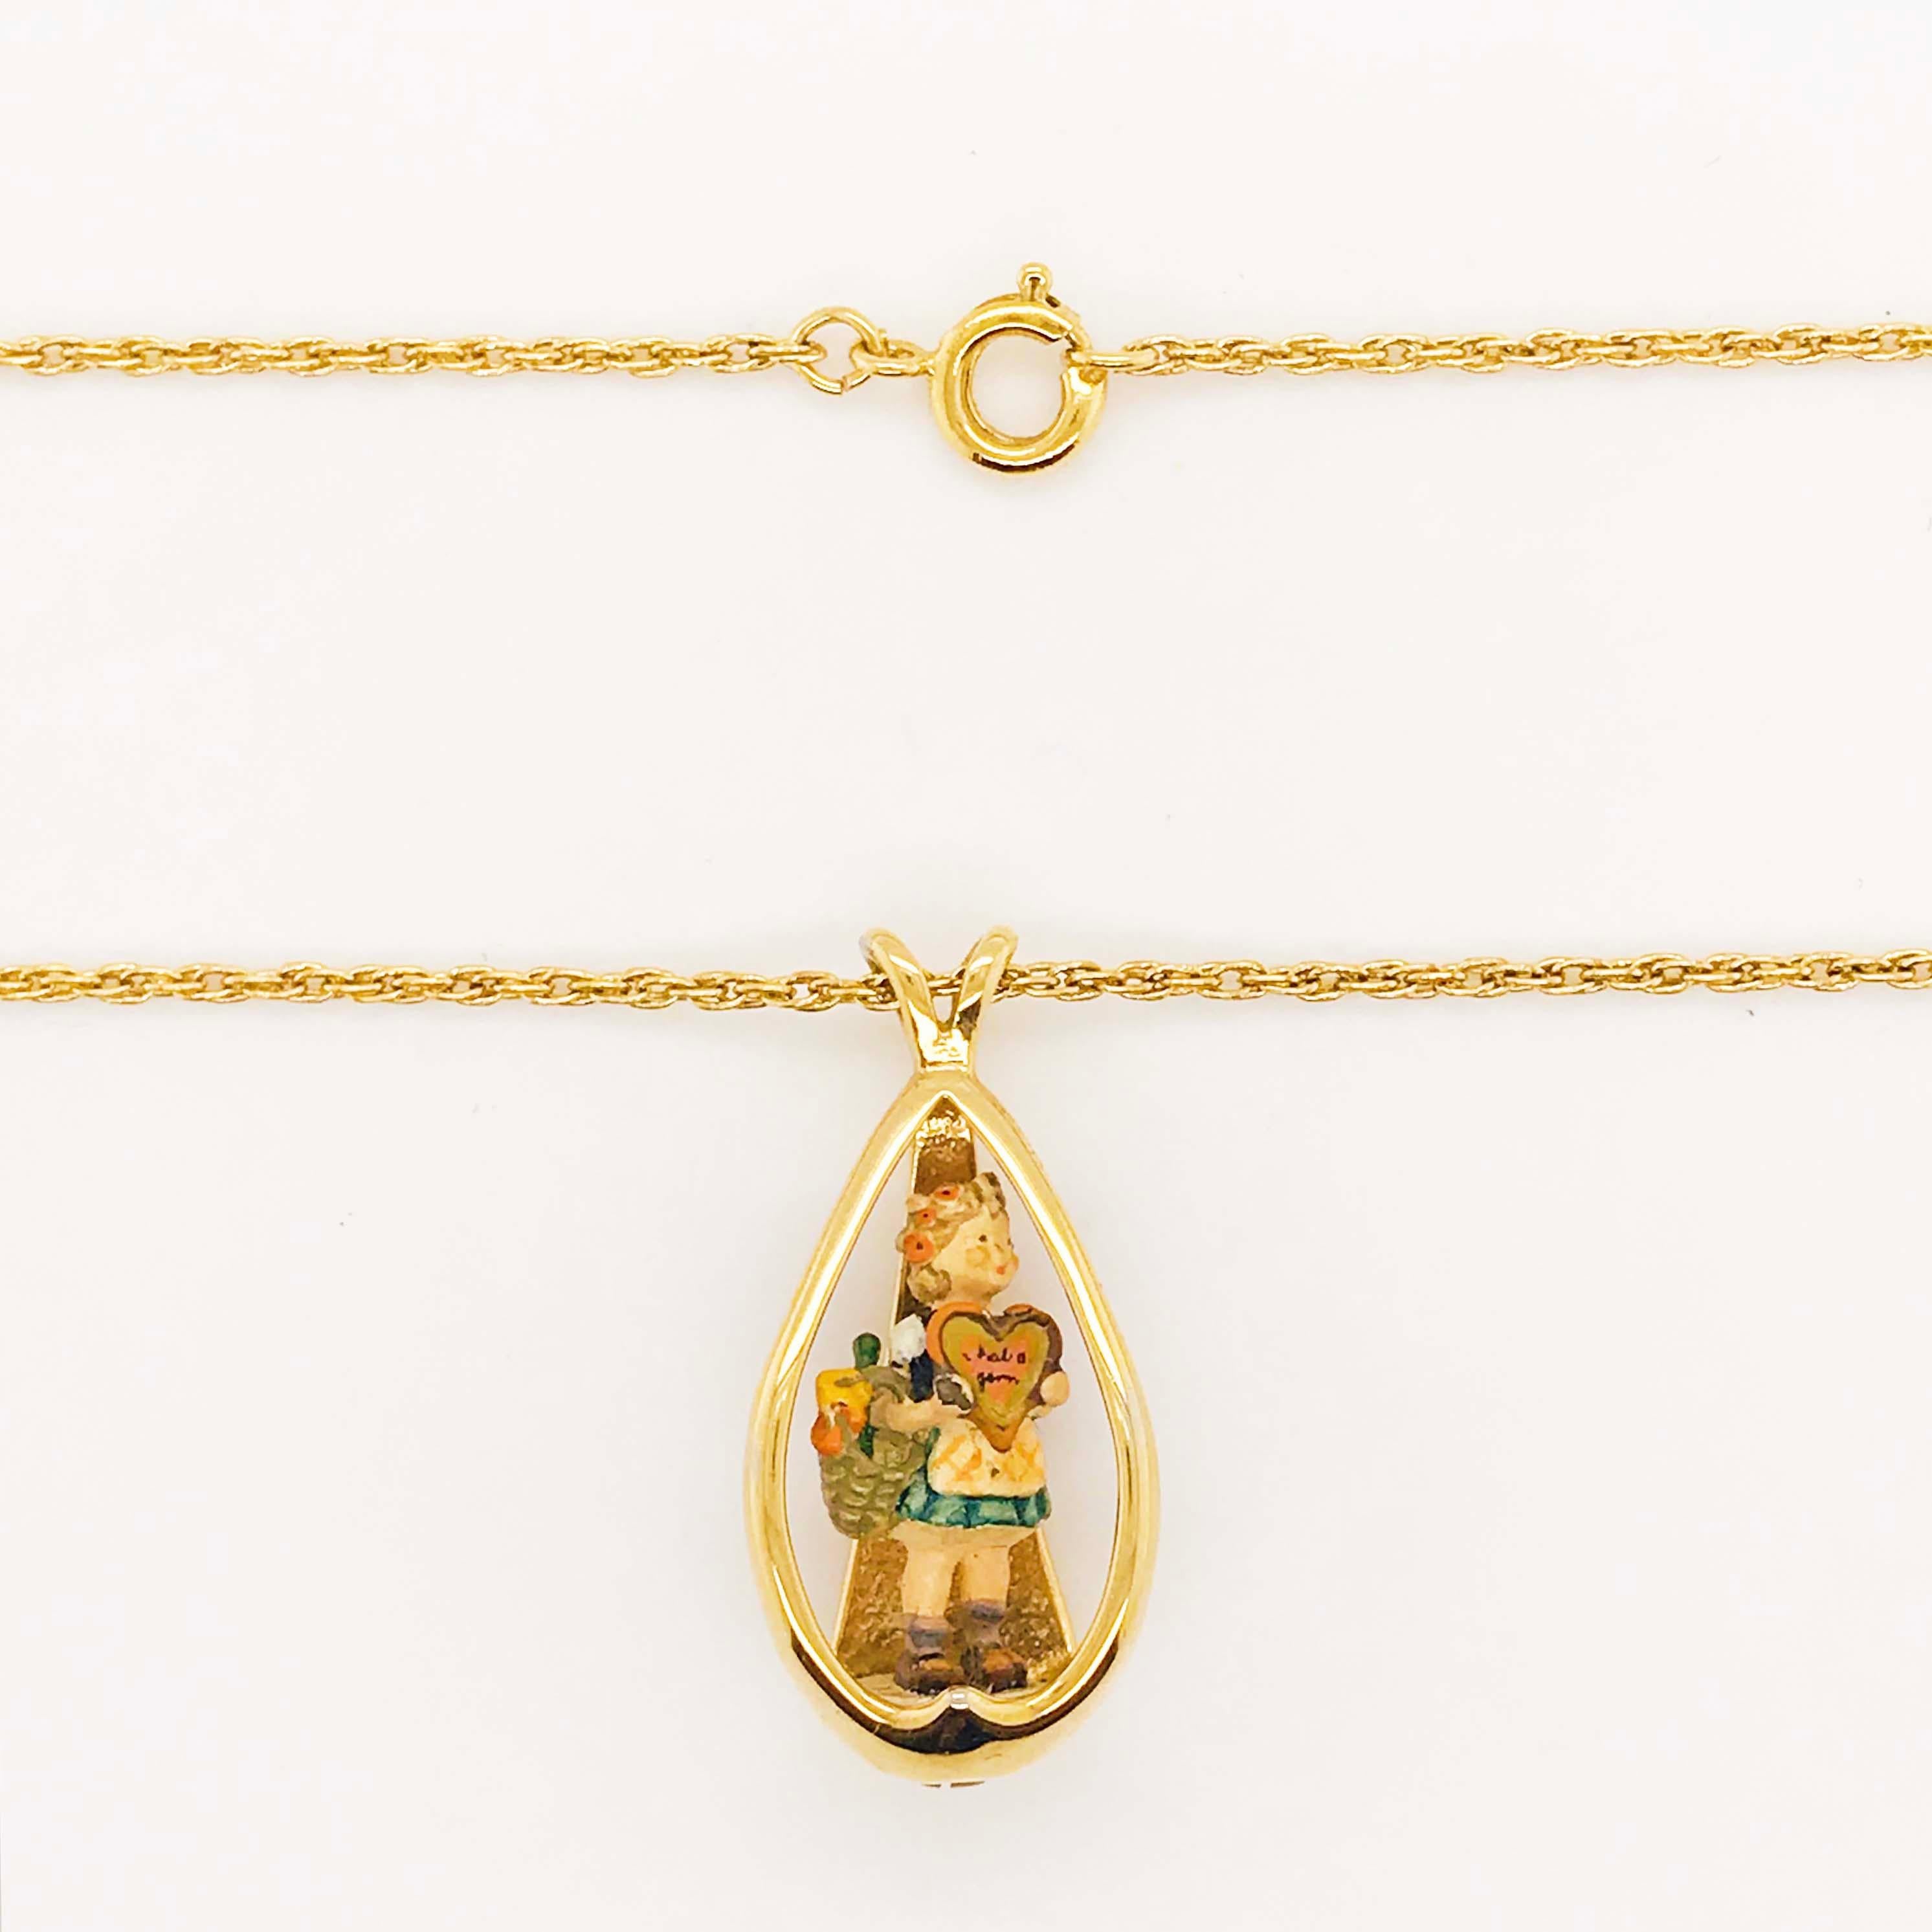 This Goebel Collector's Club pendant is a retired design and very rare! Originally this necklace was offered only to exclusive members of the Goebel Collector's Club! This circa 1977 particular pendant is named 